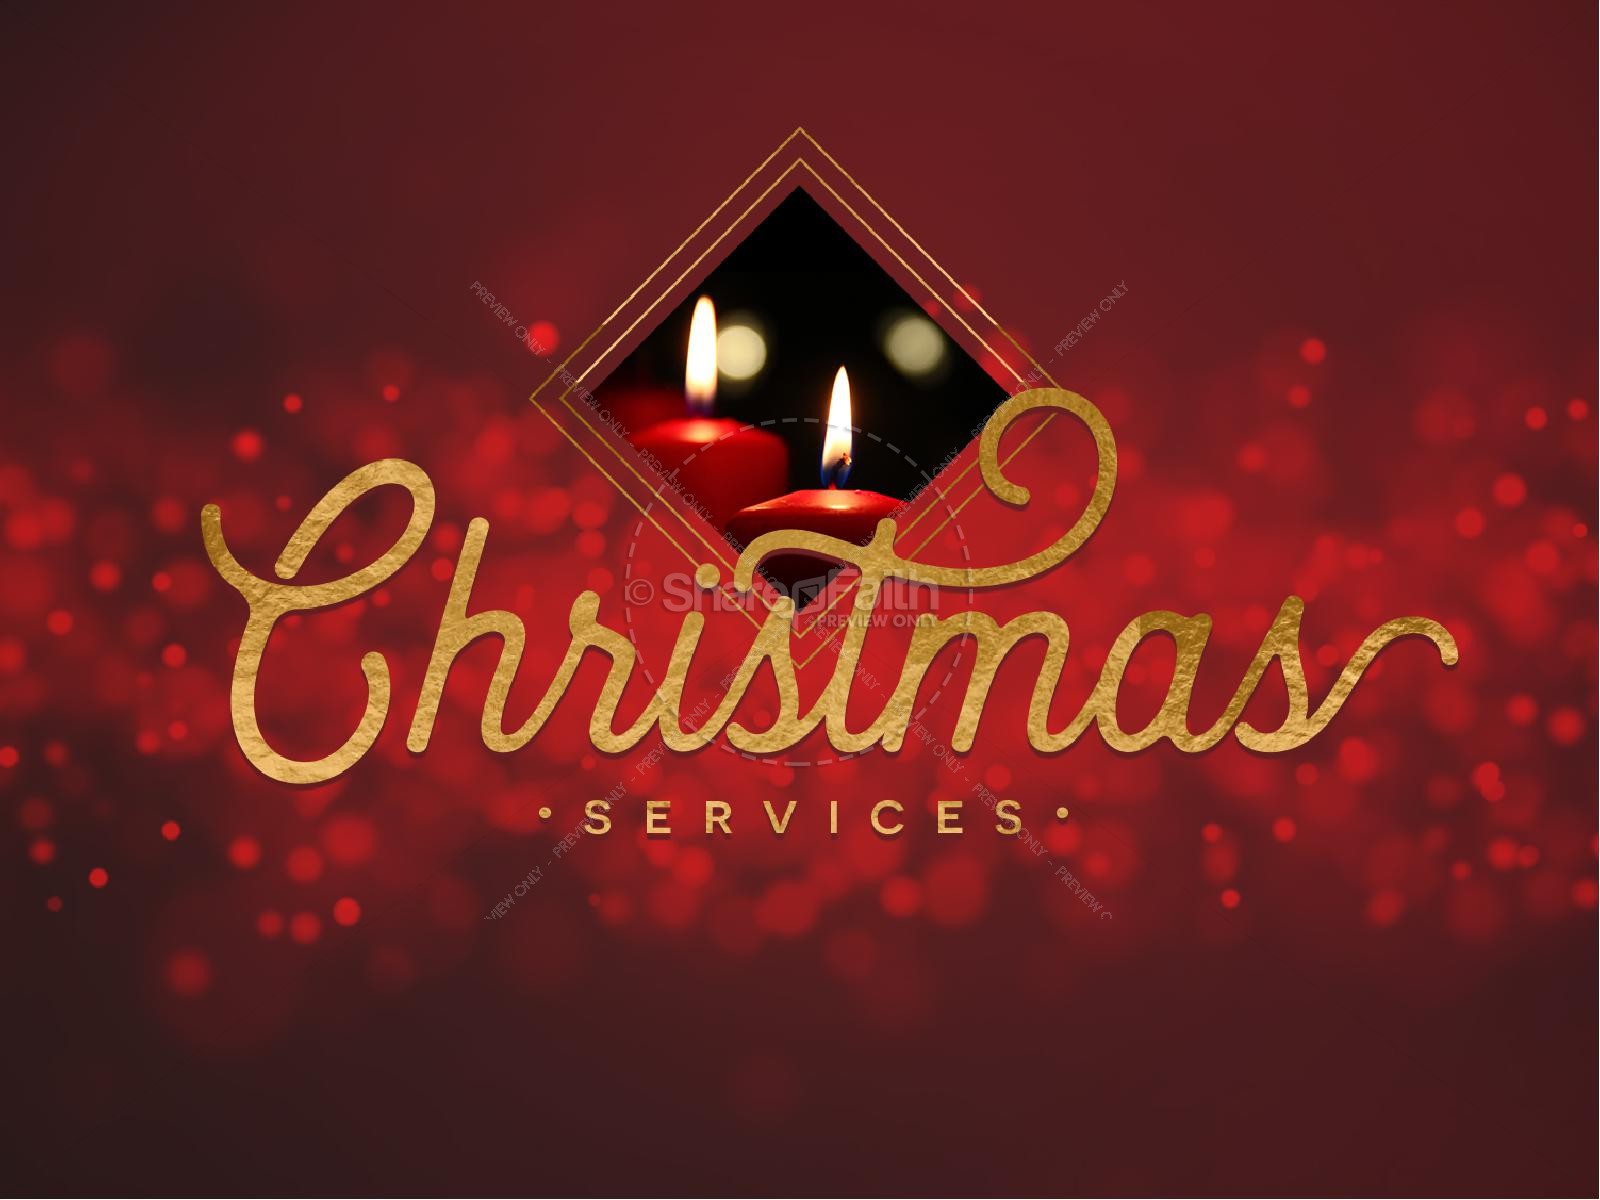 Christmas Church Services PowerPoint Template